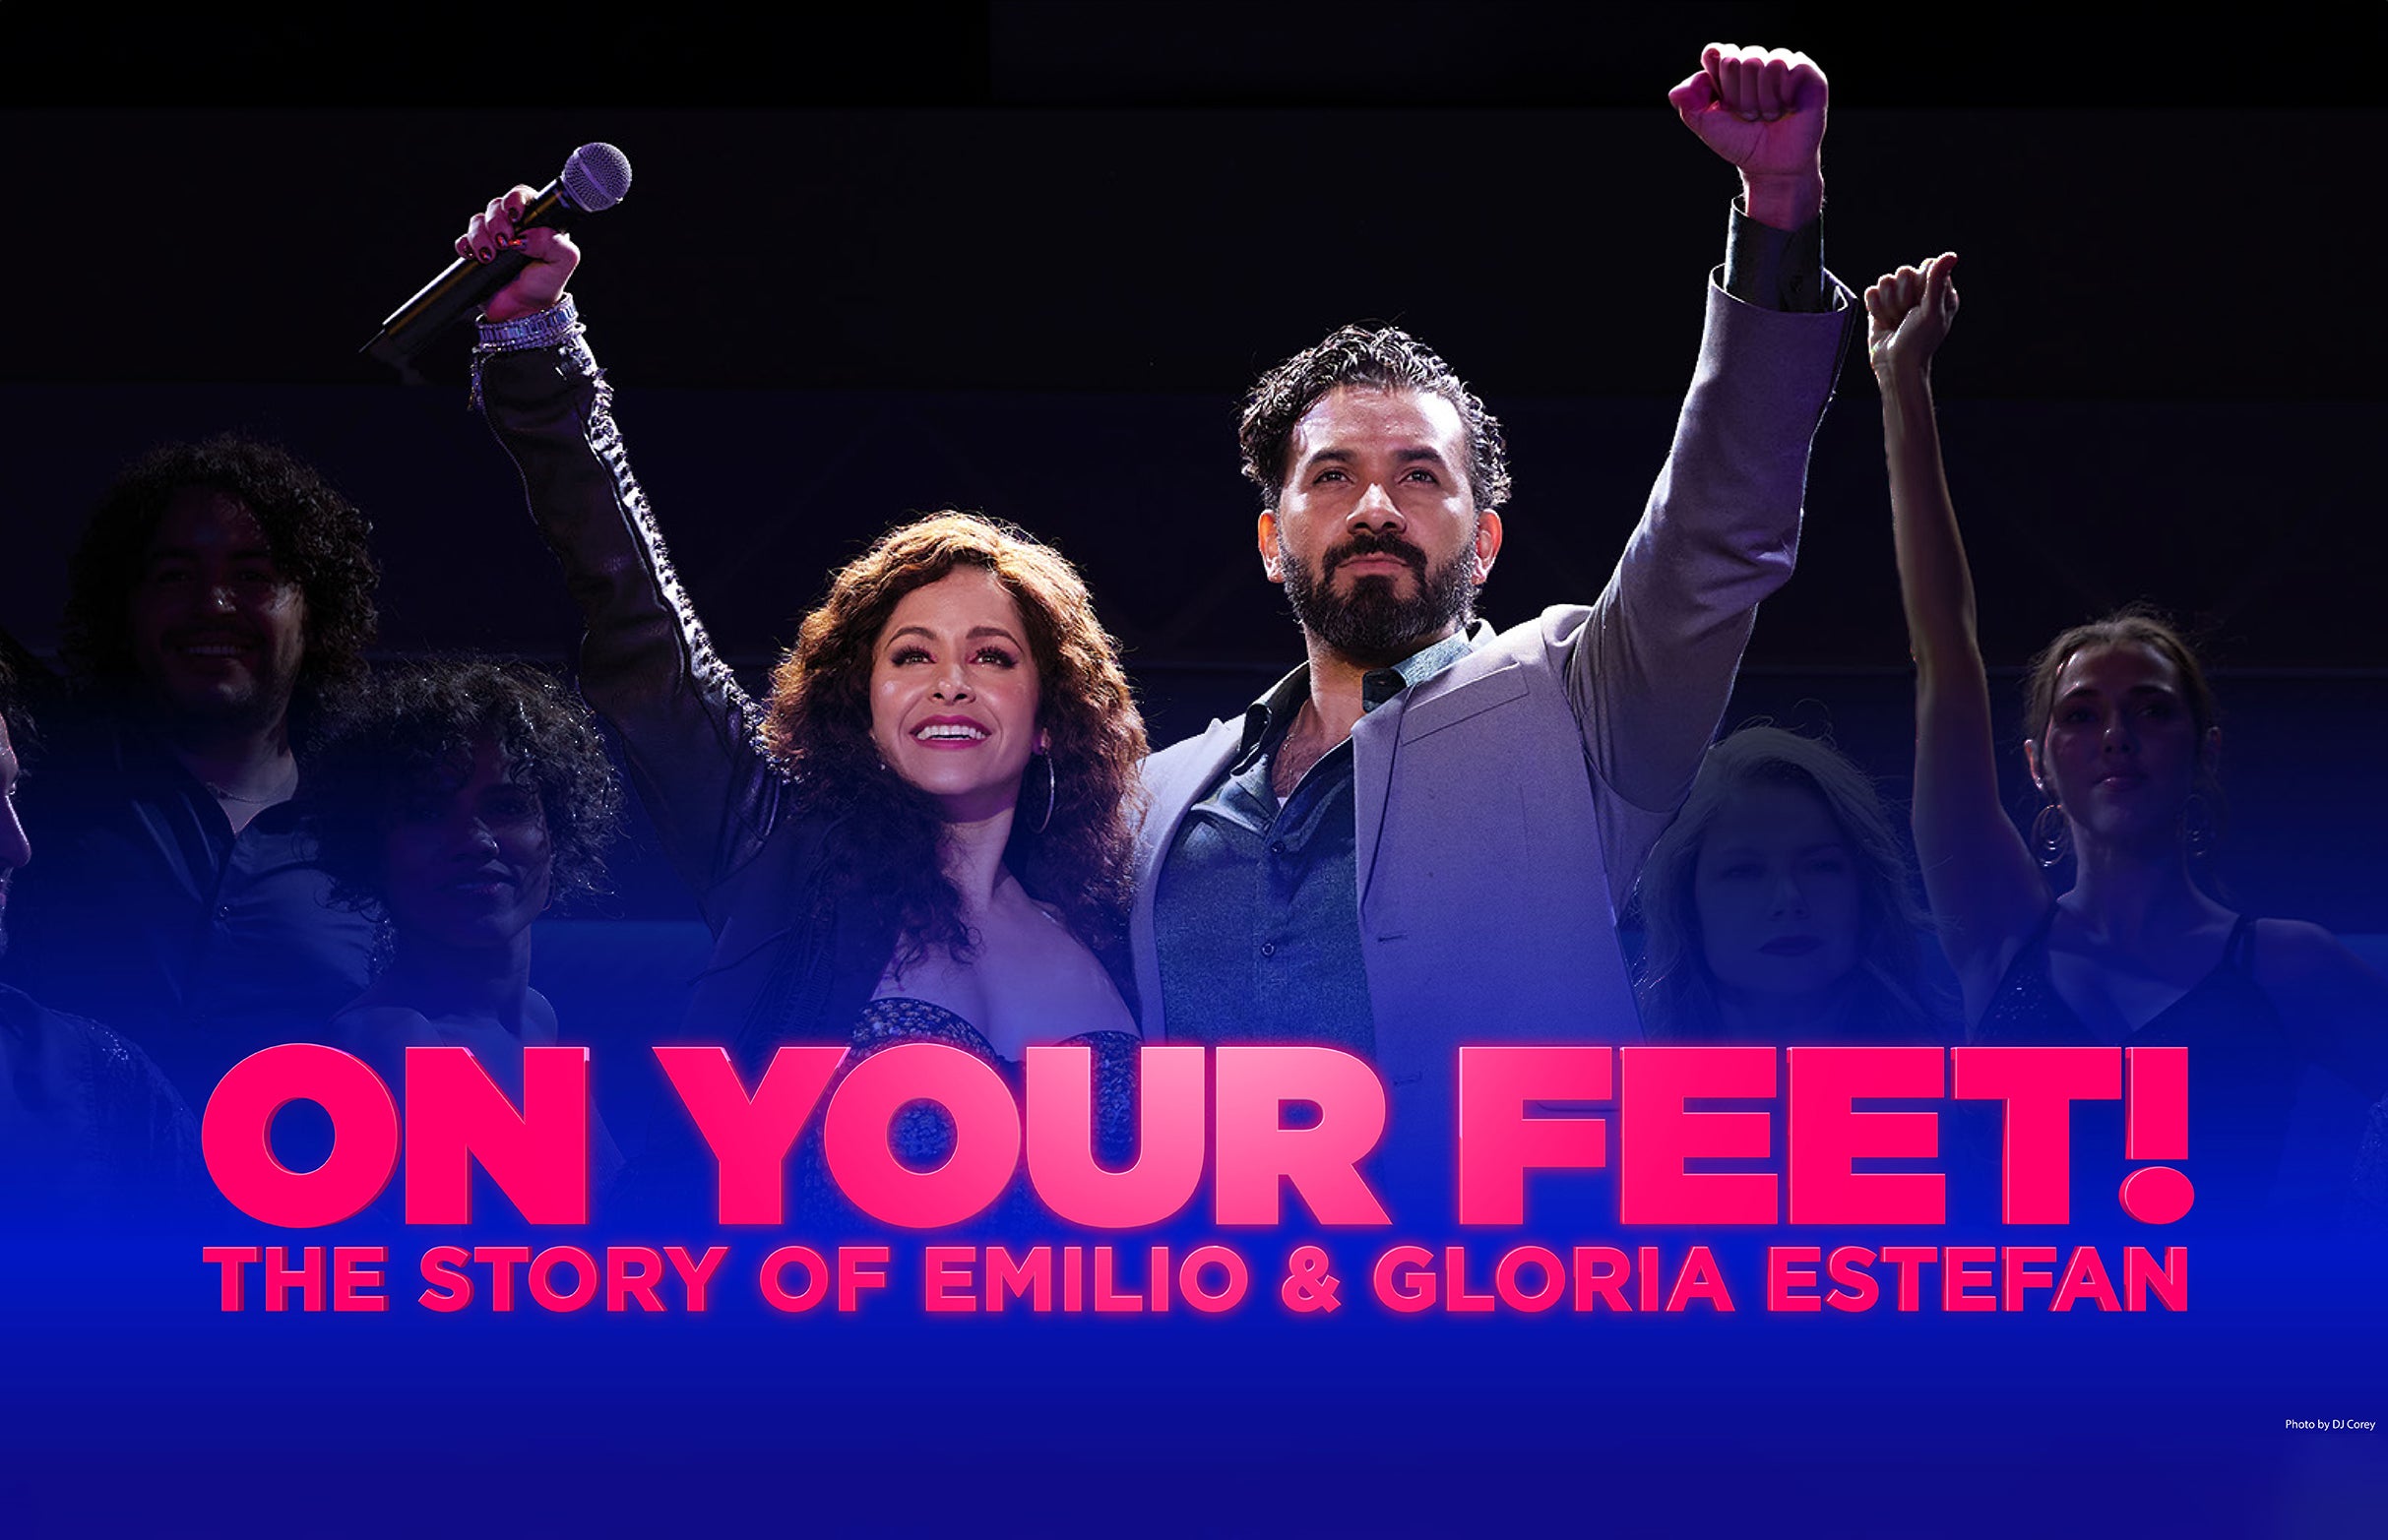 On Your Feet! (Chicago) in Chicago promo photo for BIC Cyber Weekend presale offer code